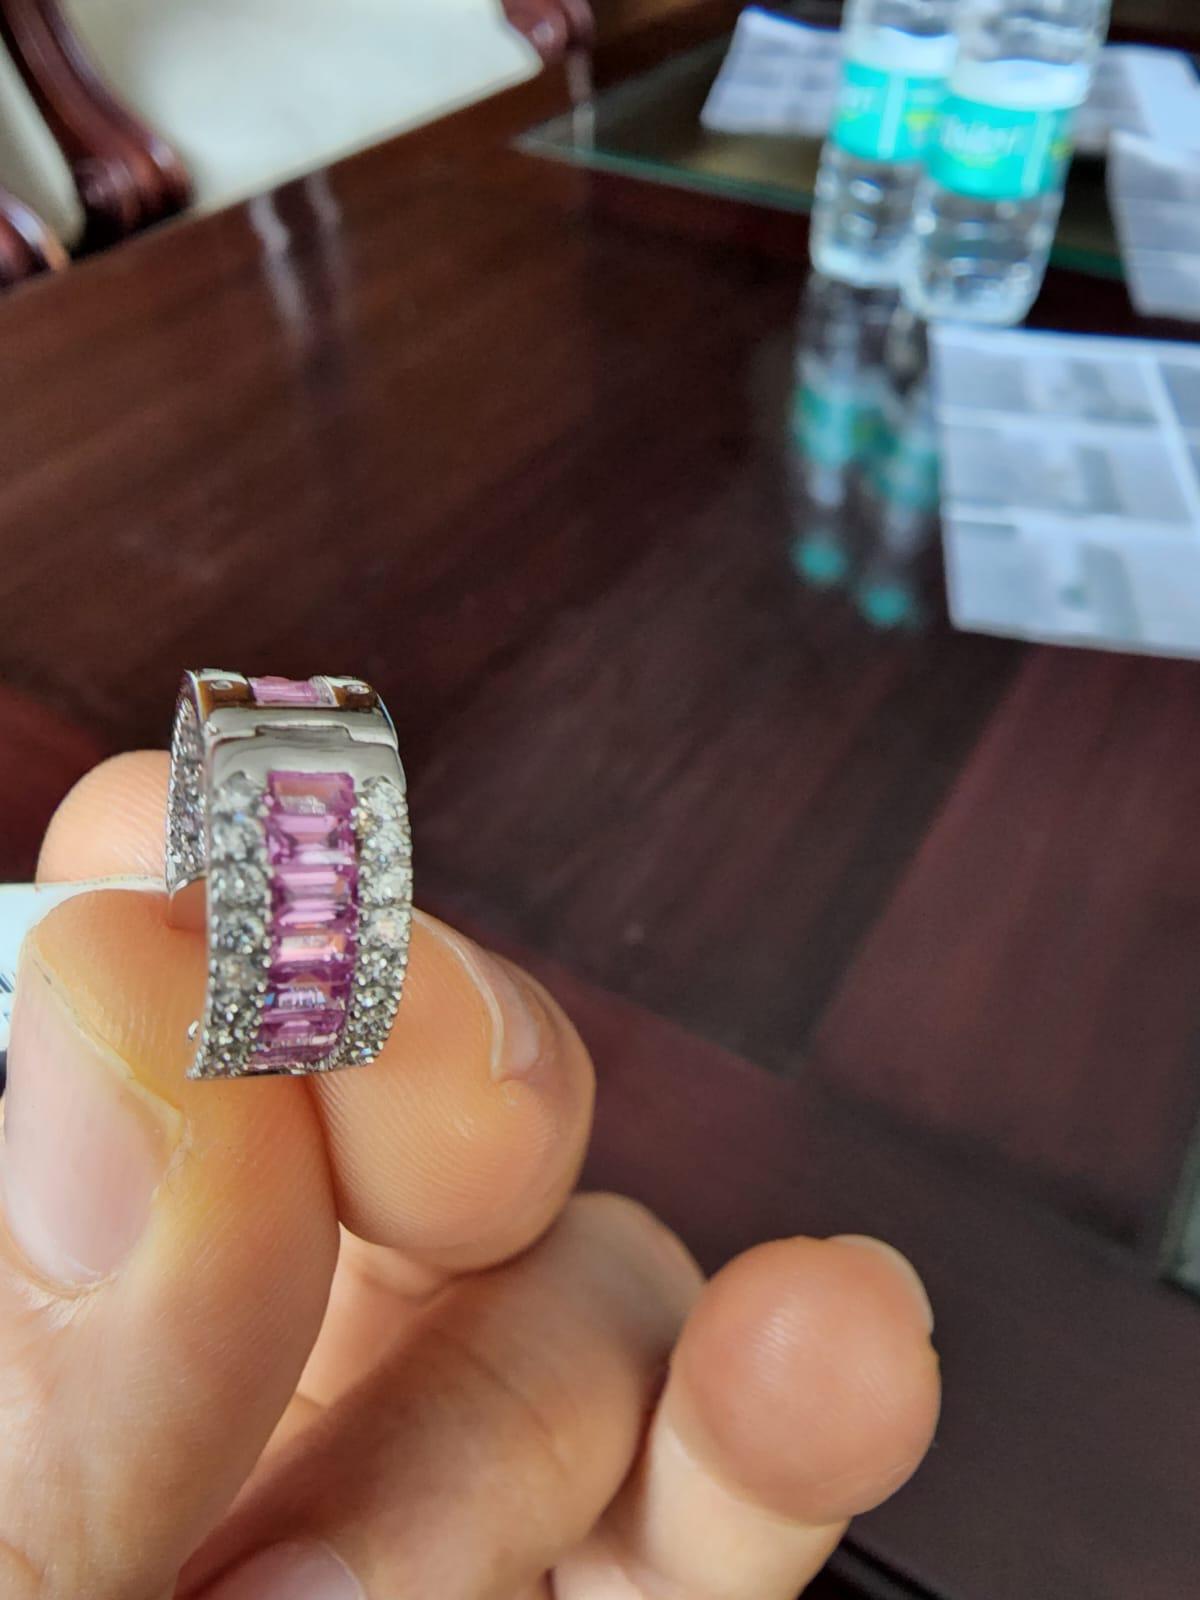 This is an amazing natural 0.96 carats diamond & pink sapphire 3.98 carats of Gold Weight is 7.08 gms (18k)

It’s very hard to capture the true color and luster of the stone, I have tried to add pictures which are taken professionally and by me from